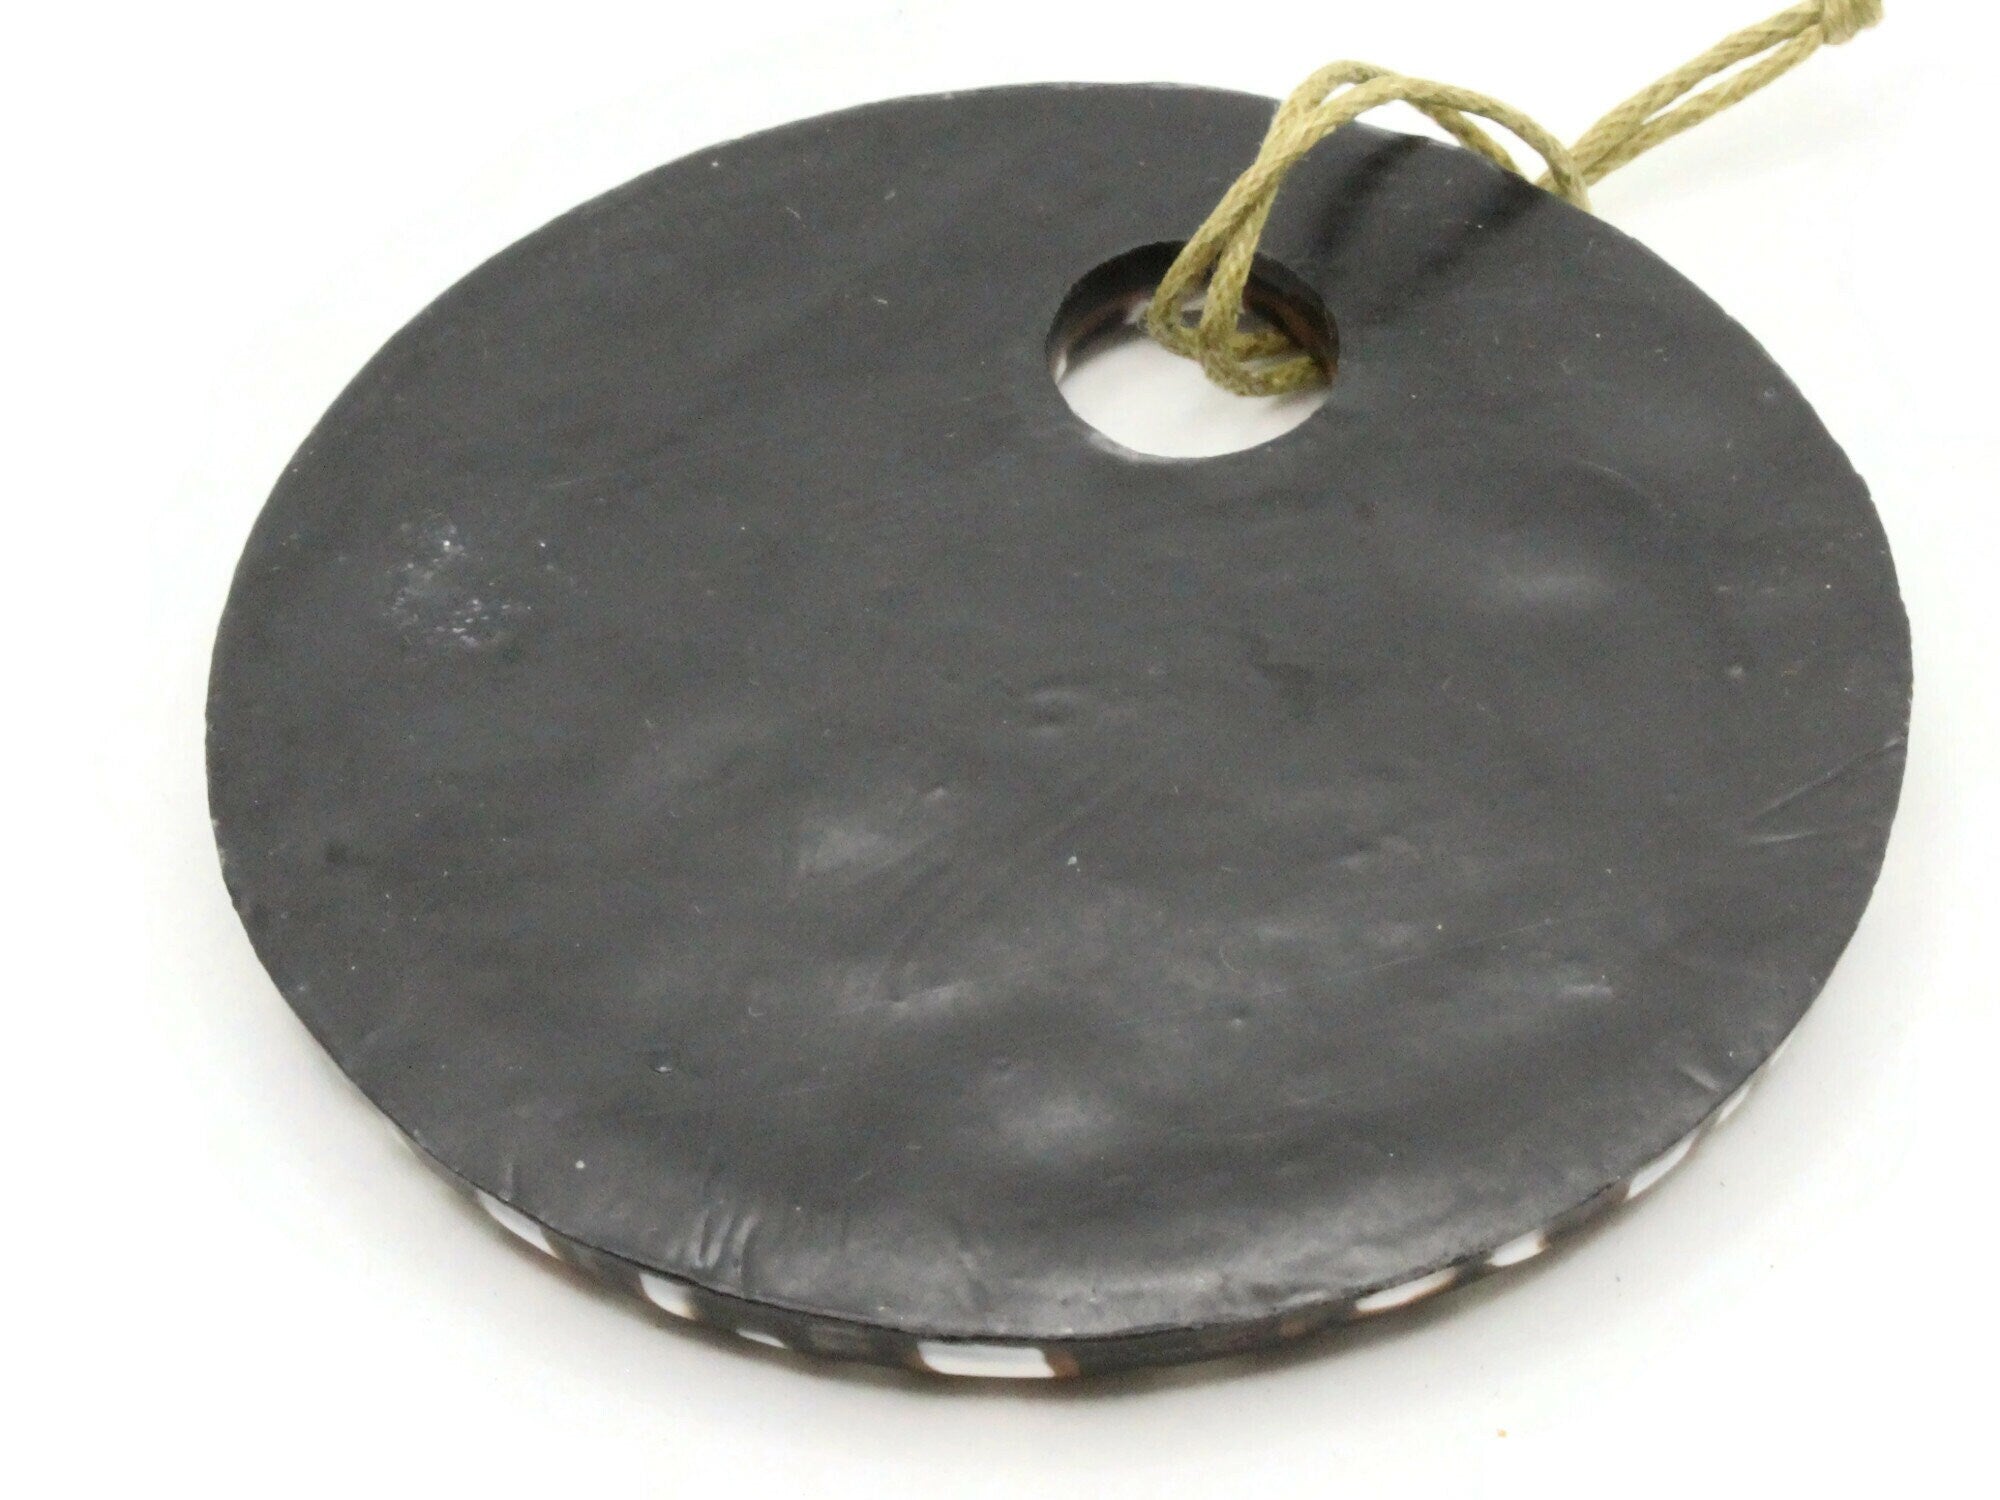 68mm Browns White and Black Polymer Clay Flat Circle Gogo Pendant